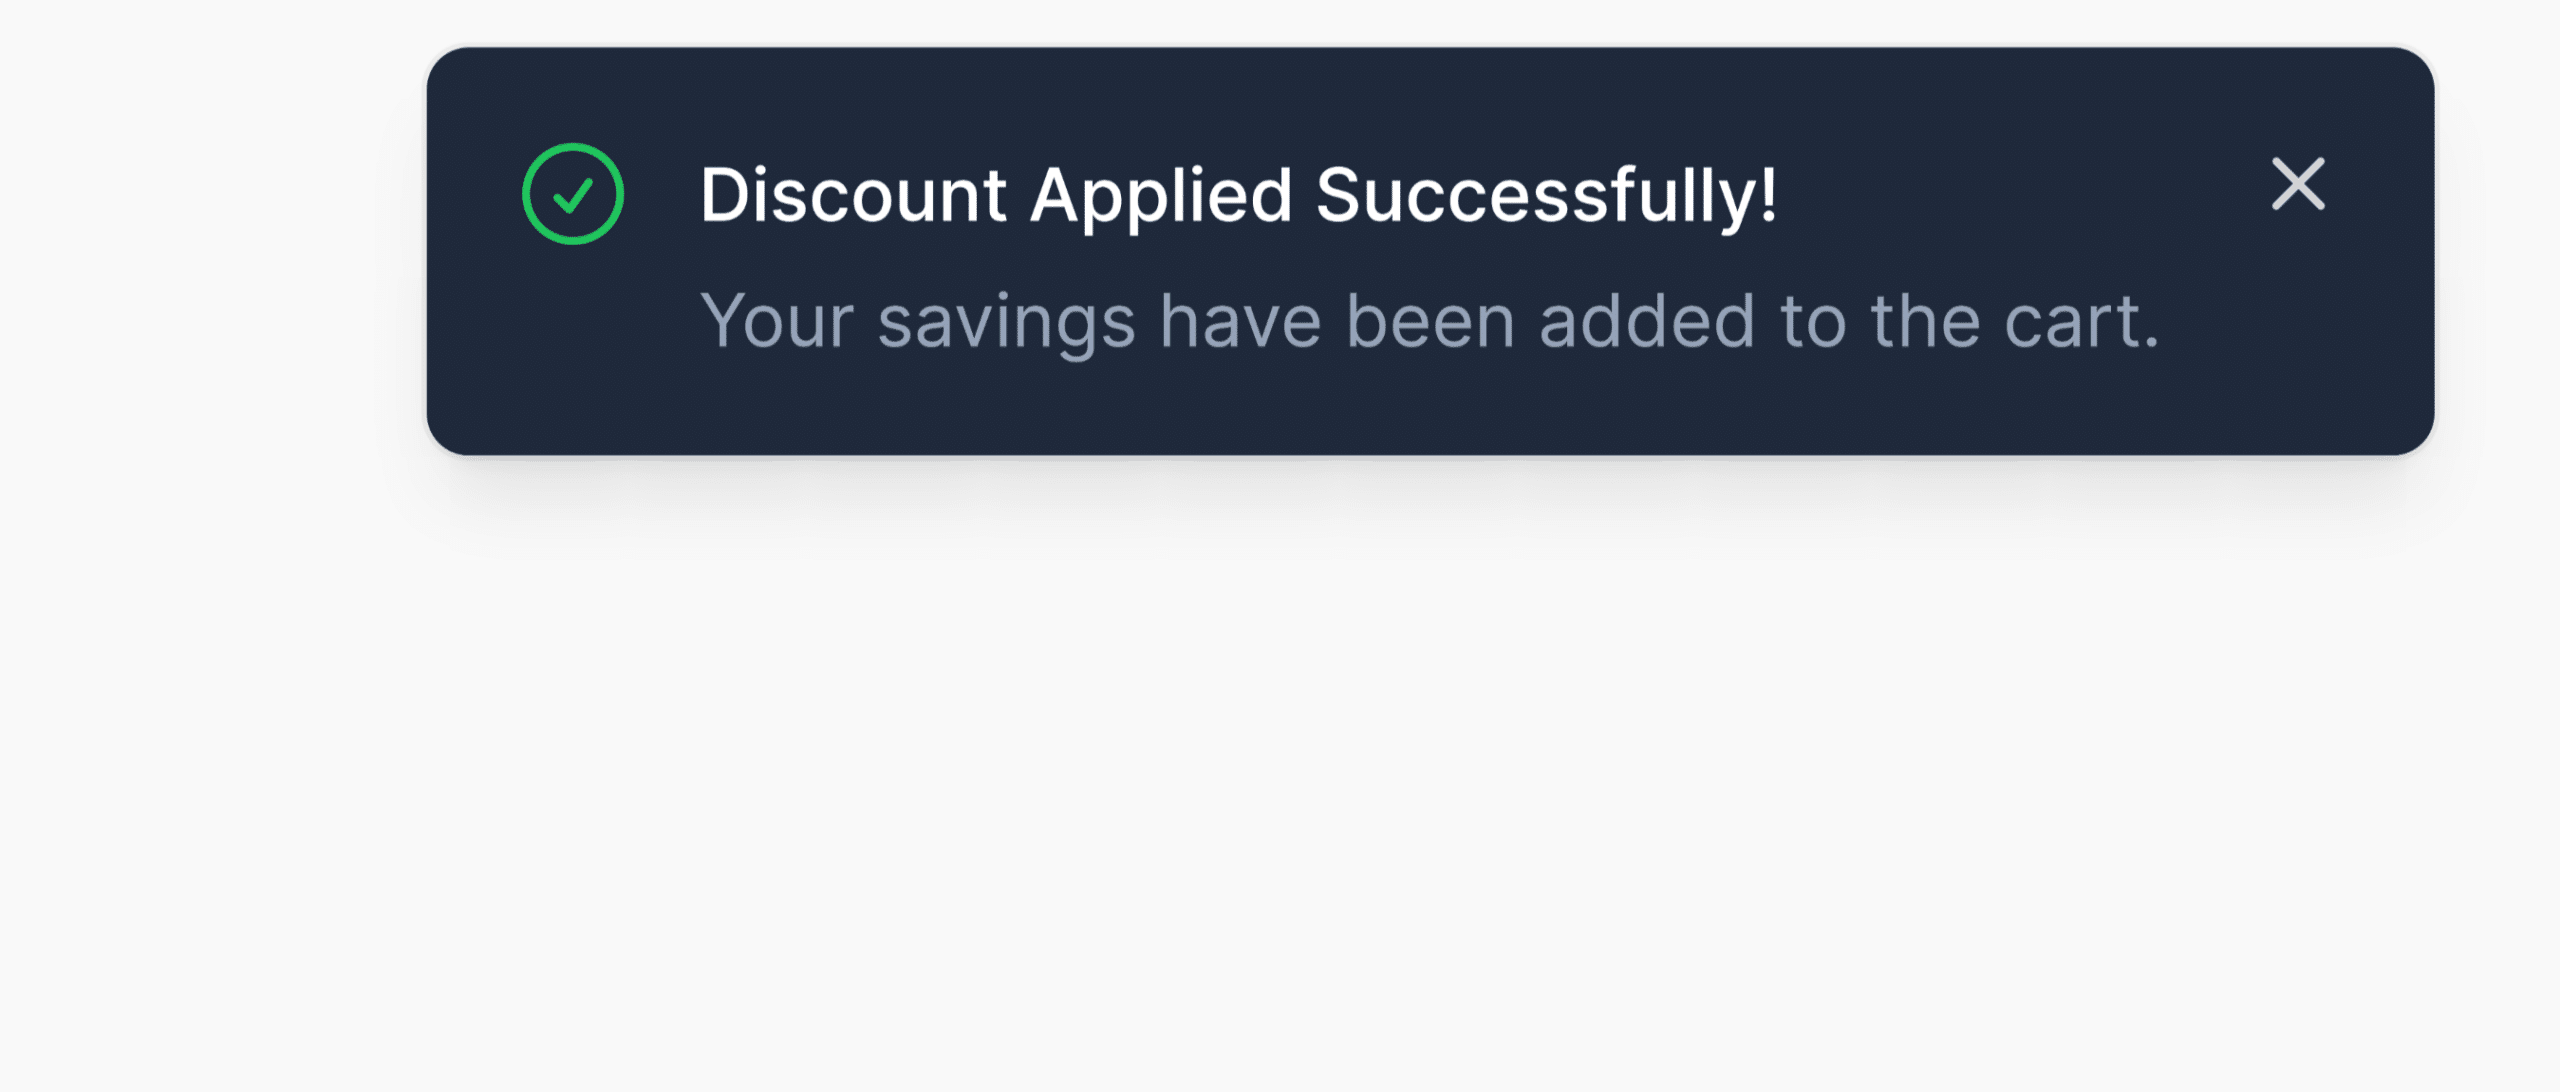 The dark theme for the discount notification